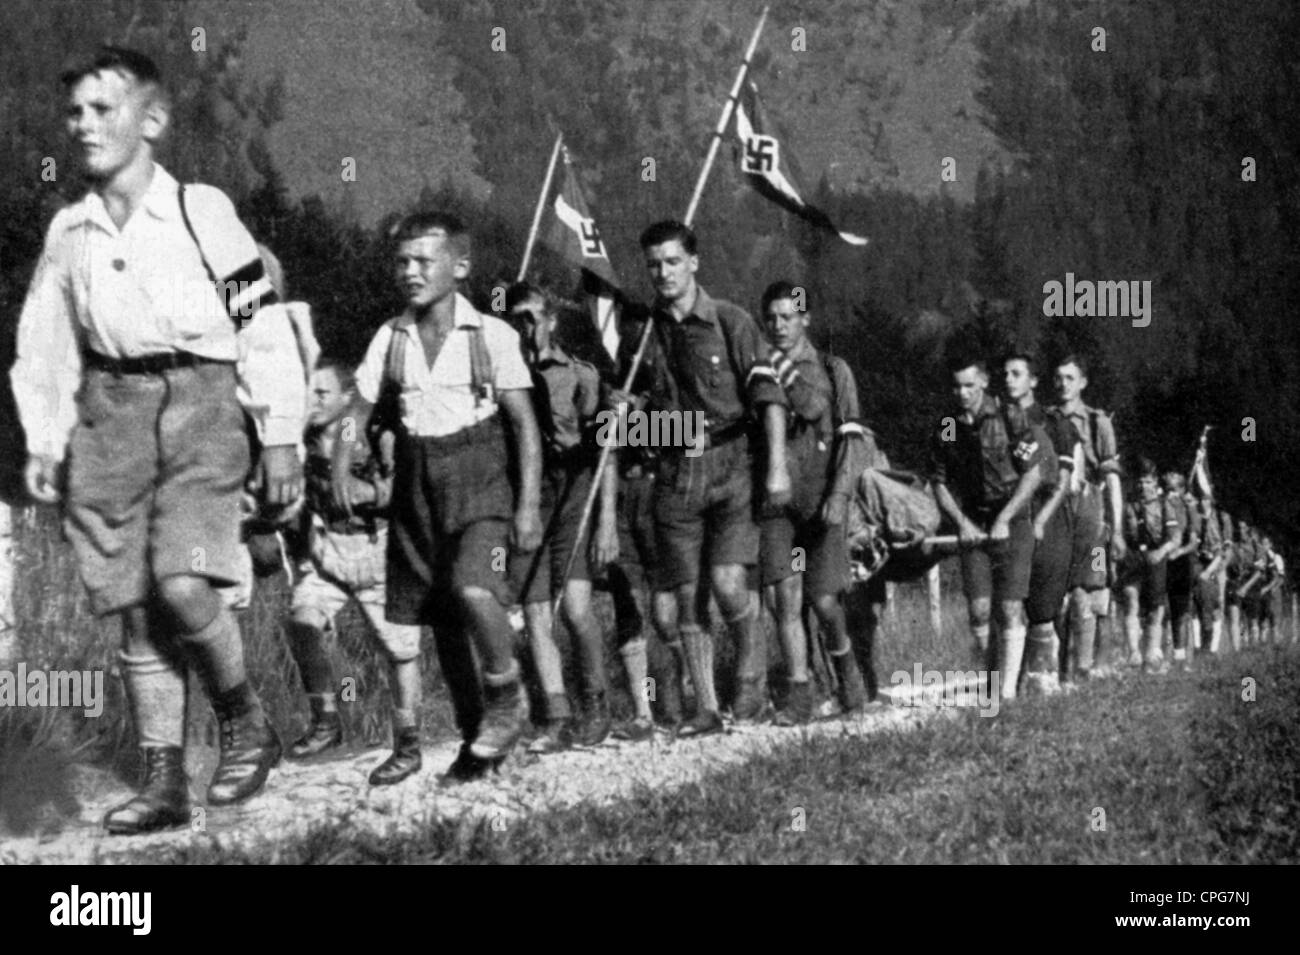 National Socialism, organisations, Hitler Youth (Hitlerjugend, HJ), Hitler Youth boy hiking, Bavaria, circa 1935, Additional-Rights-Clearences-Not Available Stock Photo